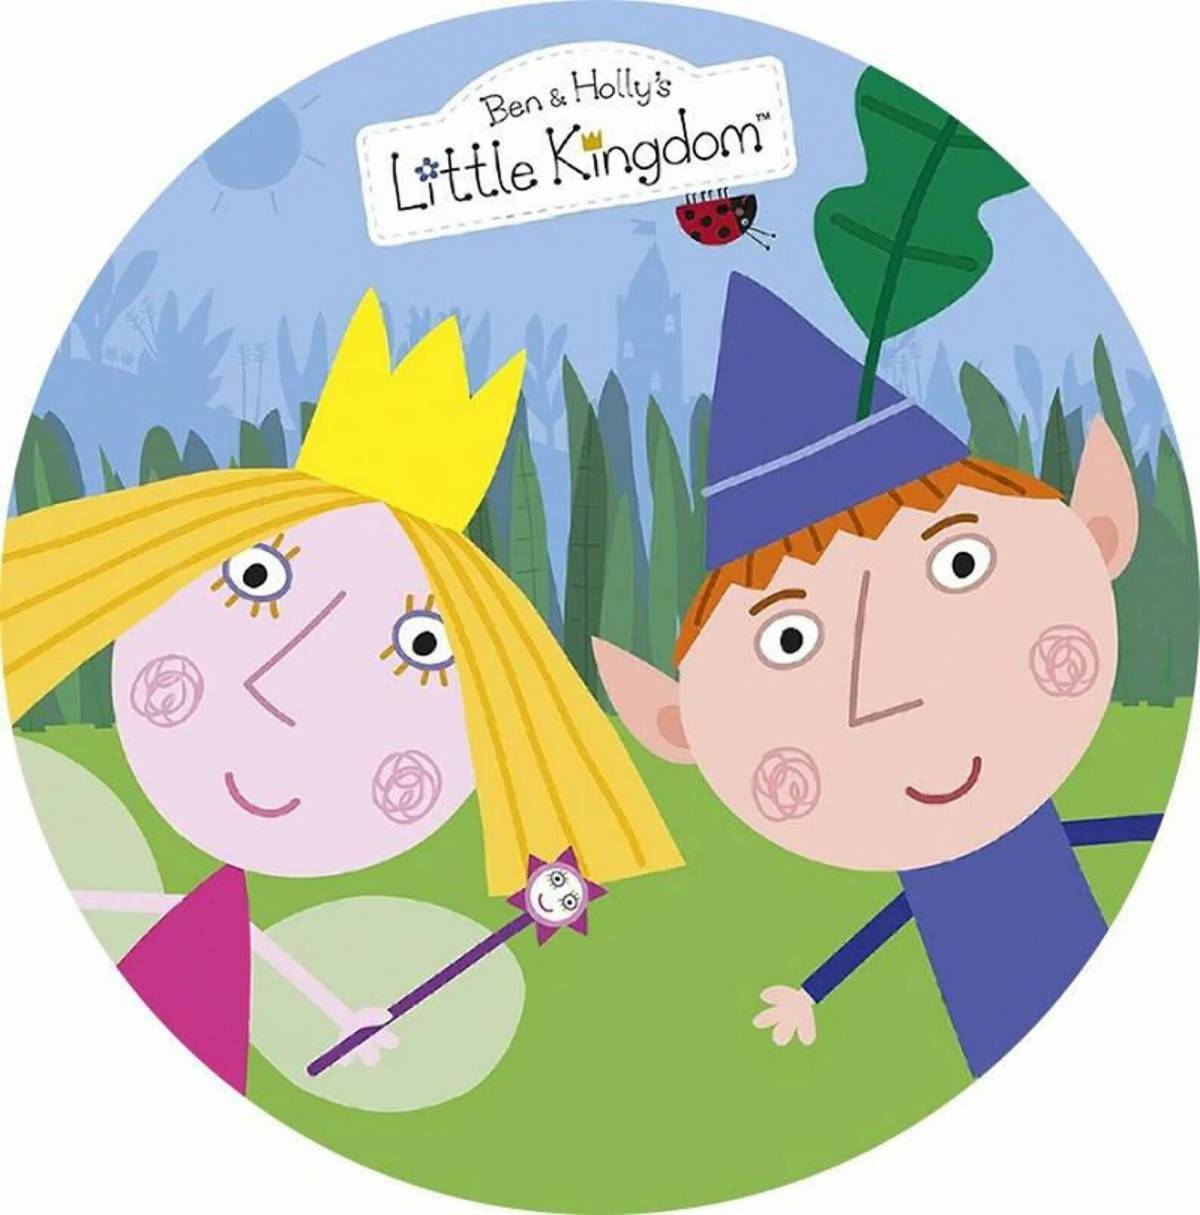 Ben and holly s little. Бен и Холли. Маленькое королевство Бена. Маенькоекоролевствобенаихолли. Холли маленькое королевство.